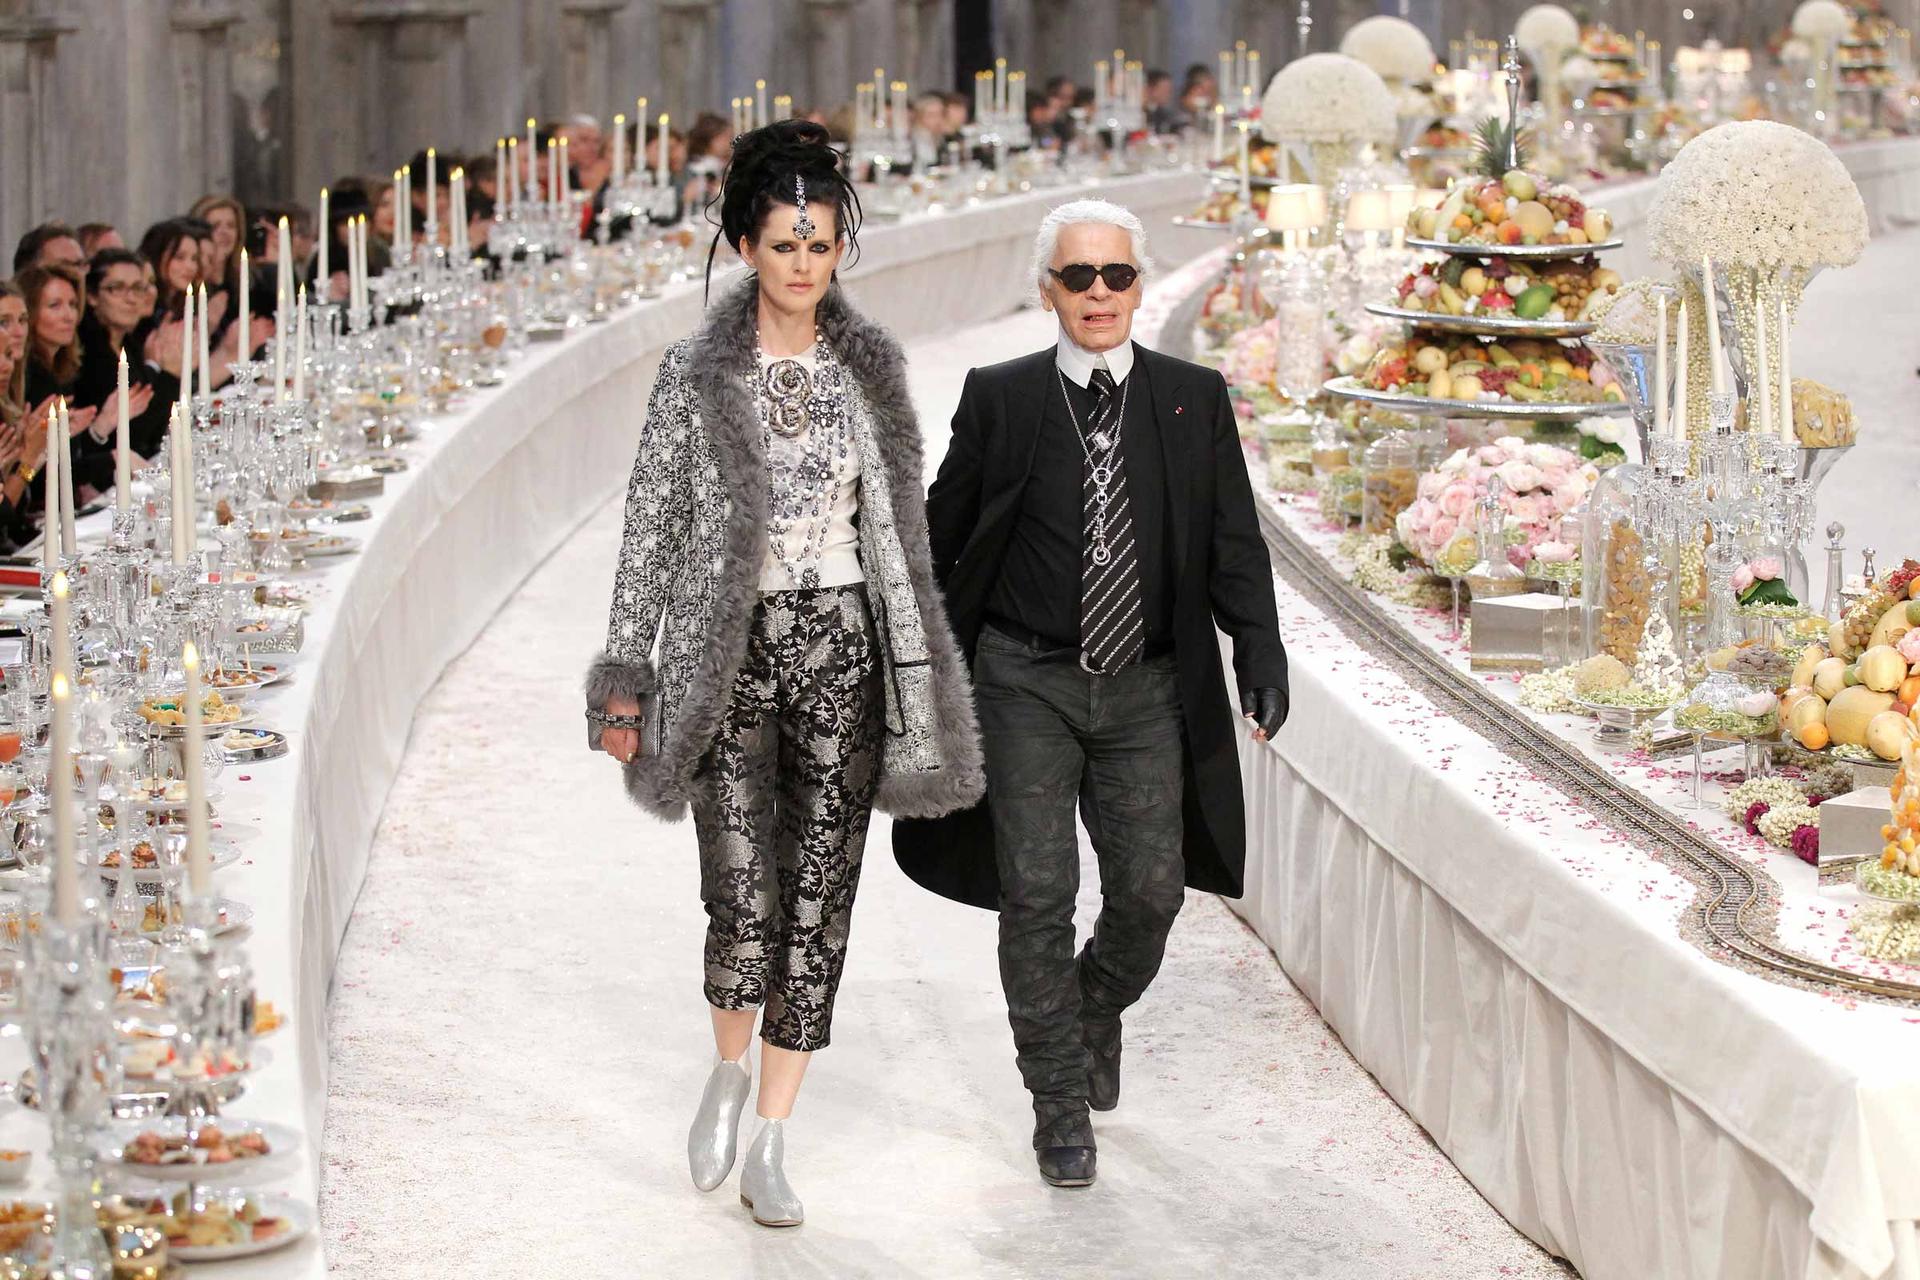 British model Stella Tennant walks with designer Karl Lagerfeld through a runway where people are seated as if for a giant banquet, with candles, crystal and piles of colorful food.